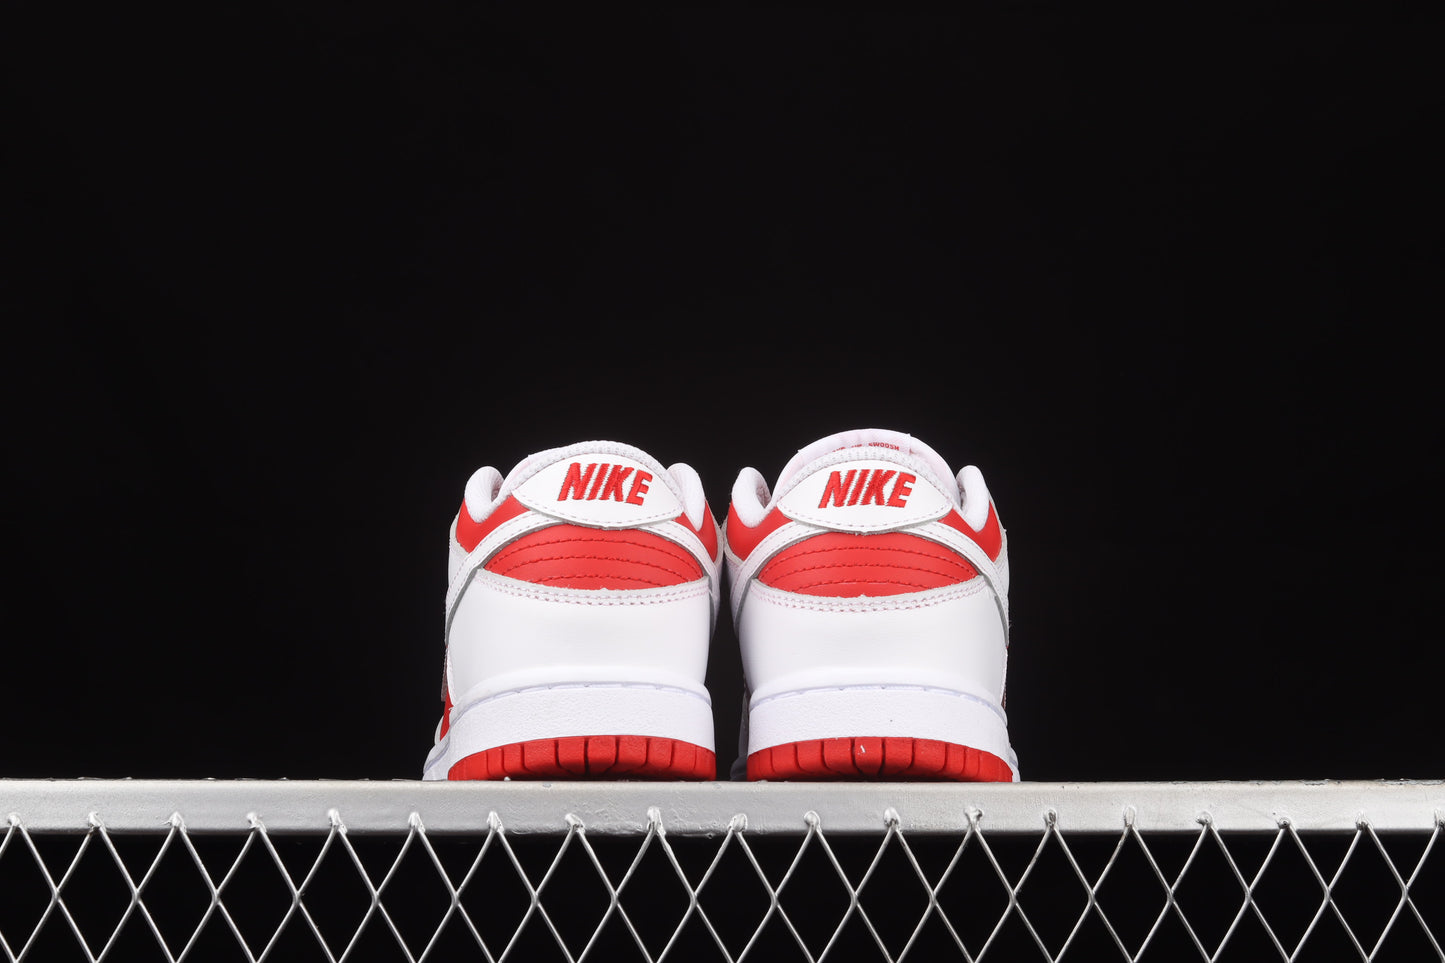 Nike Dunk Low Championship Red 2021